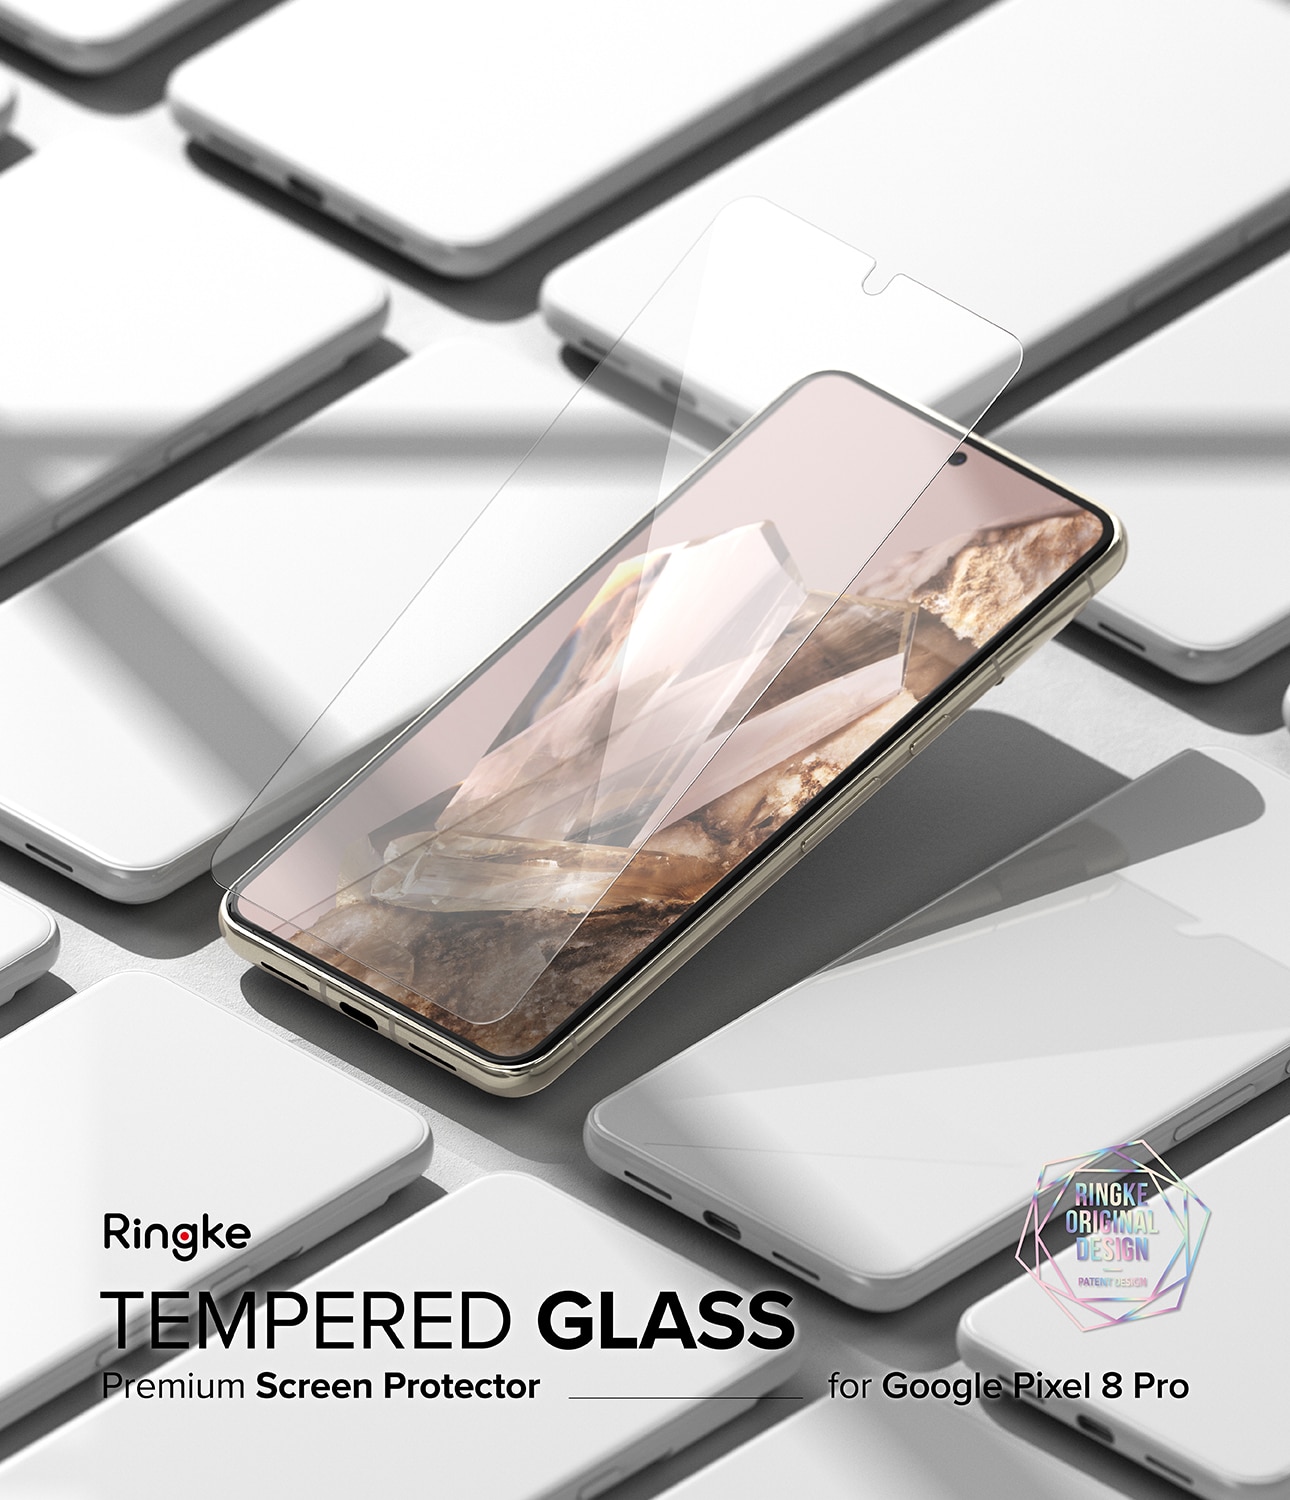 Google Pixel 8 Pro Screen Protector Glass (2-pack)